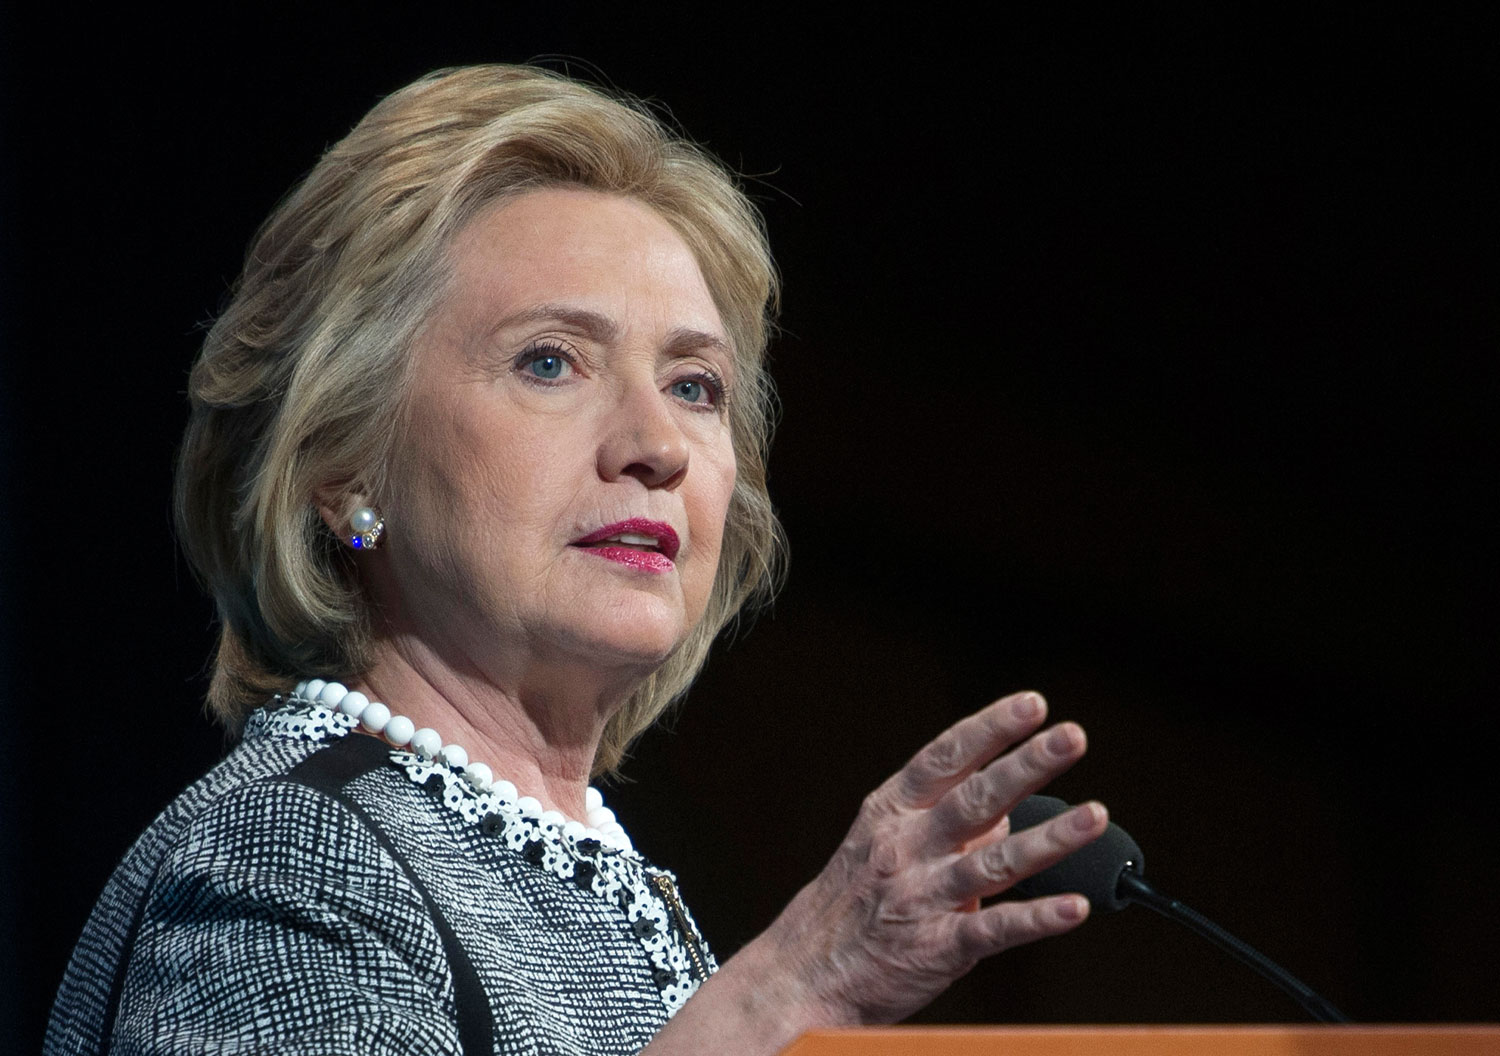 Did Hillary Clinton Just Join the Neocons on Iran Policy?